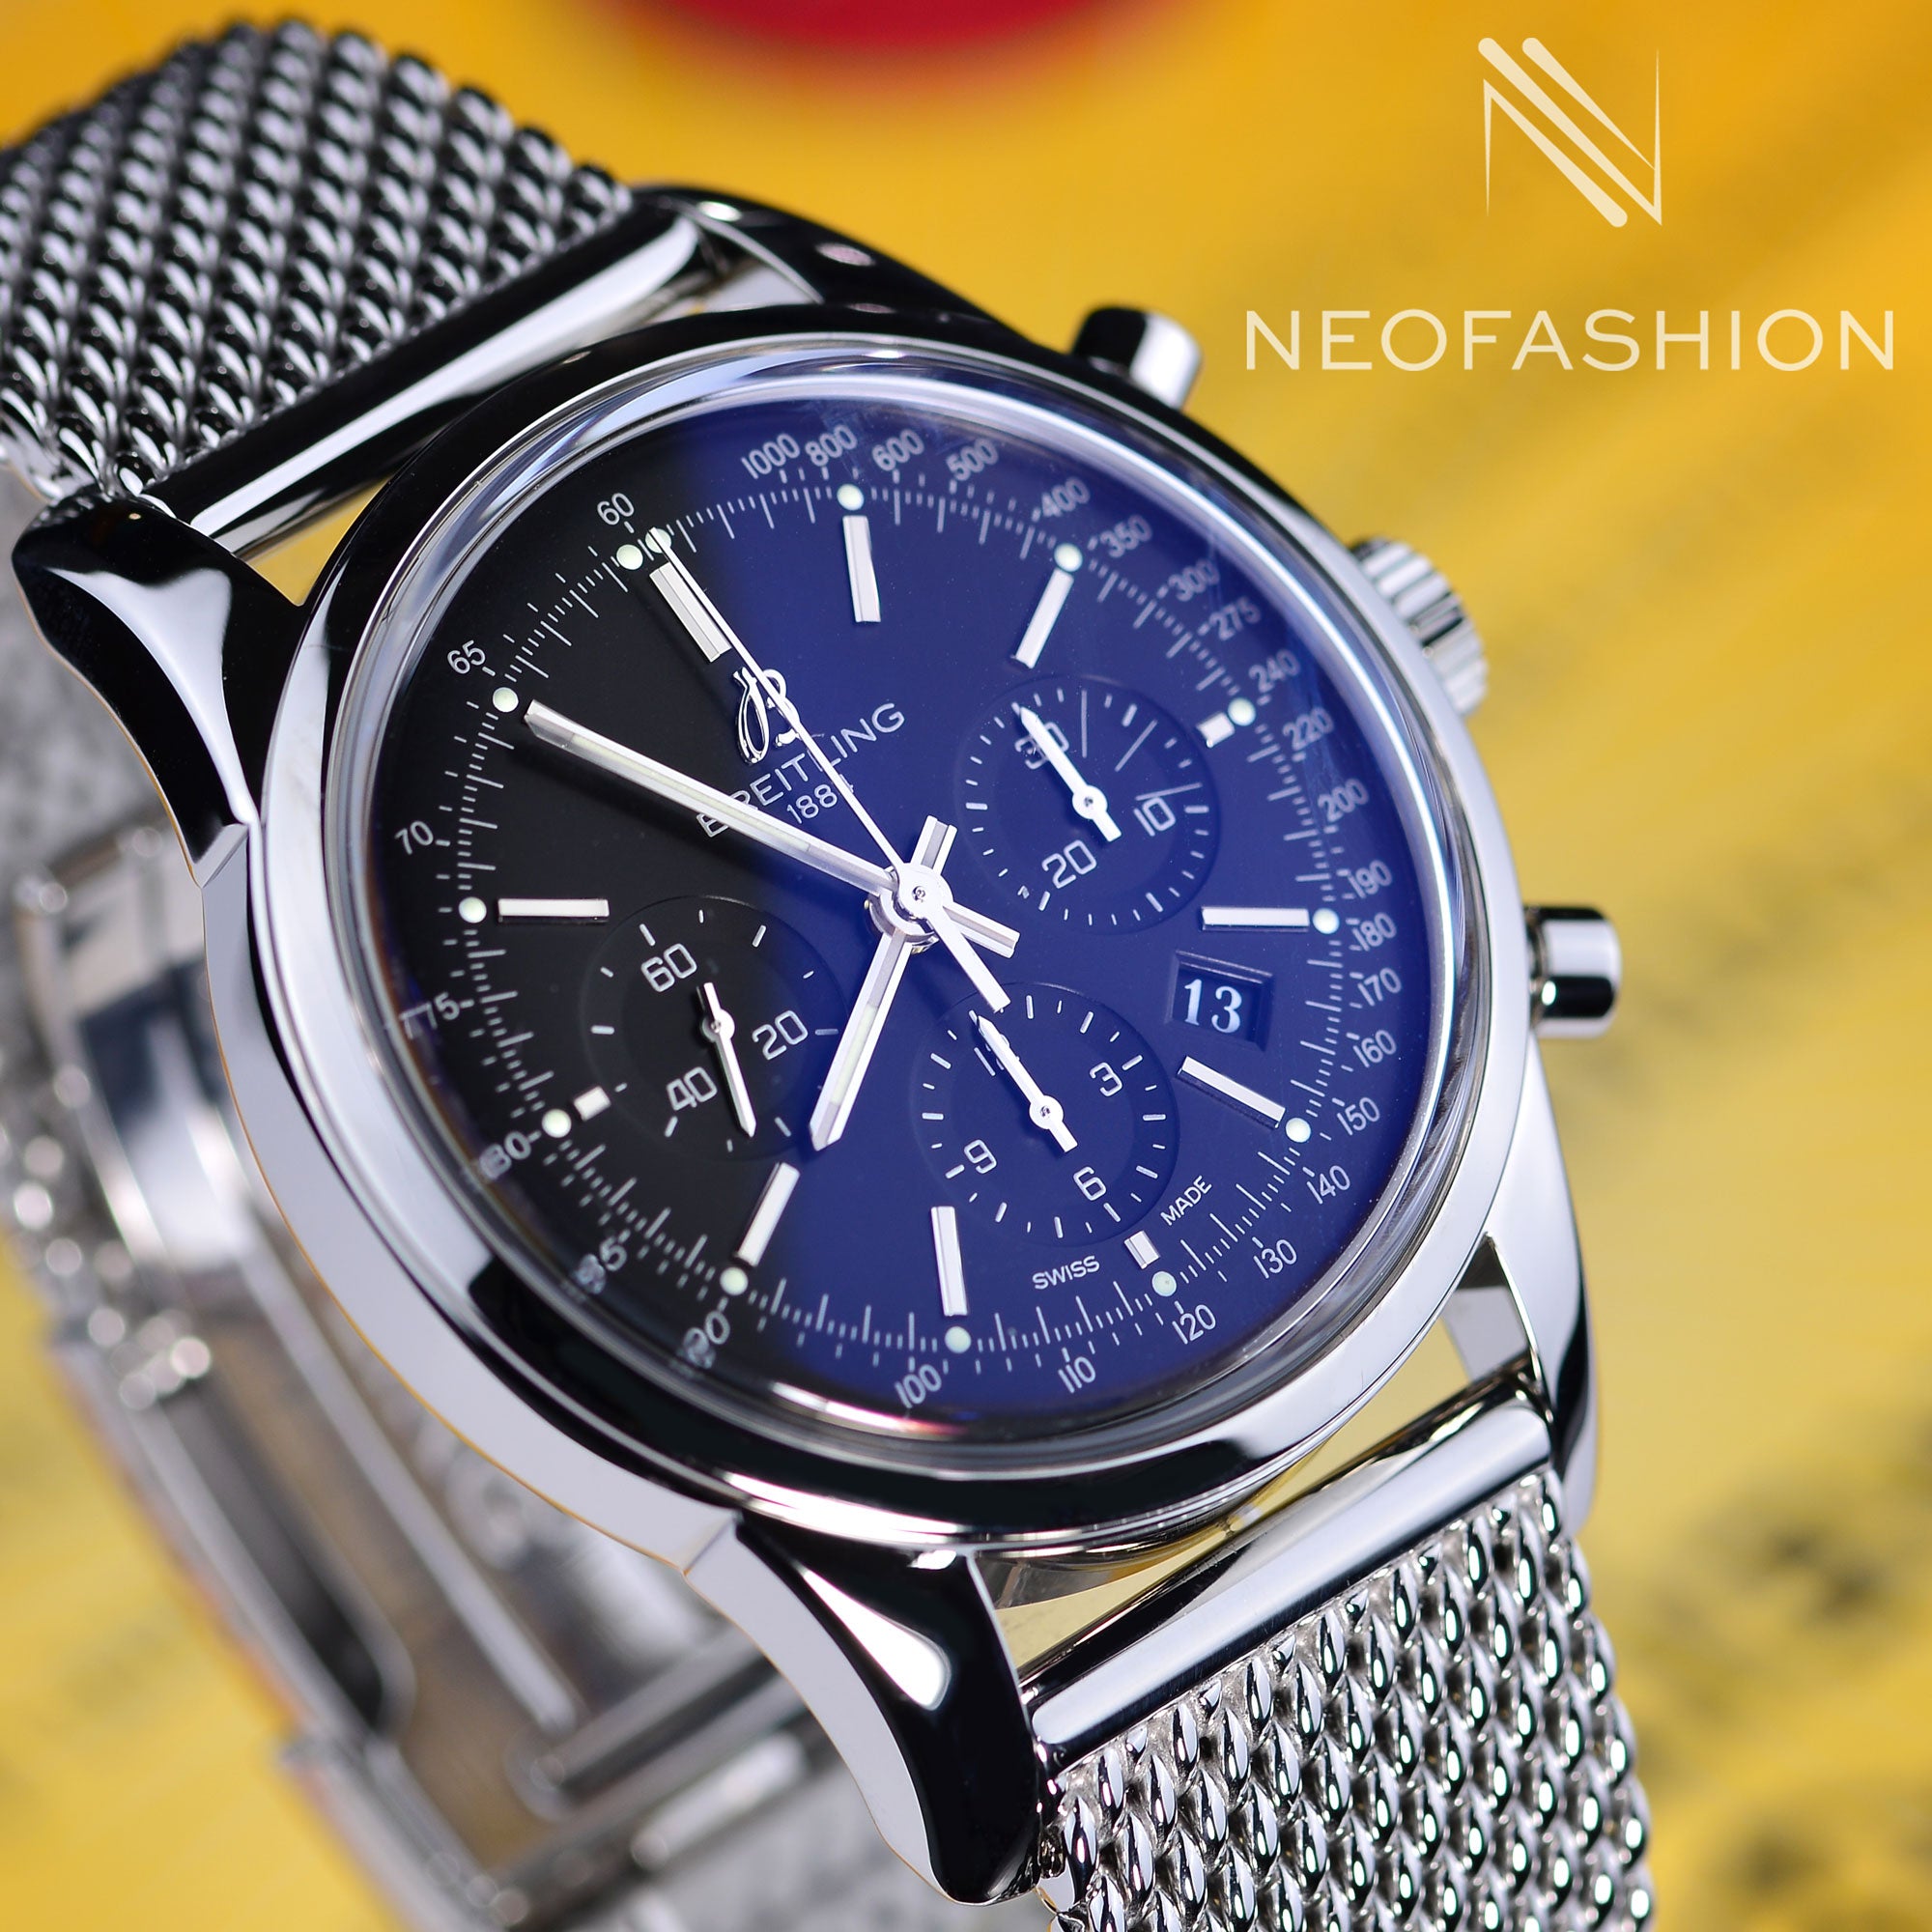 BREITLING  TRANSOCEAN, A STAINLESS STEEL AUTOMATIC WRISTWATCH